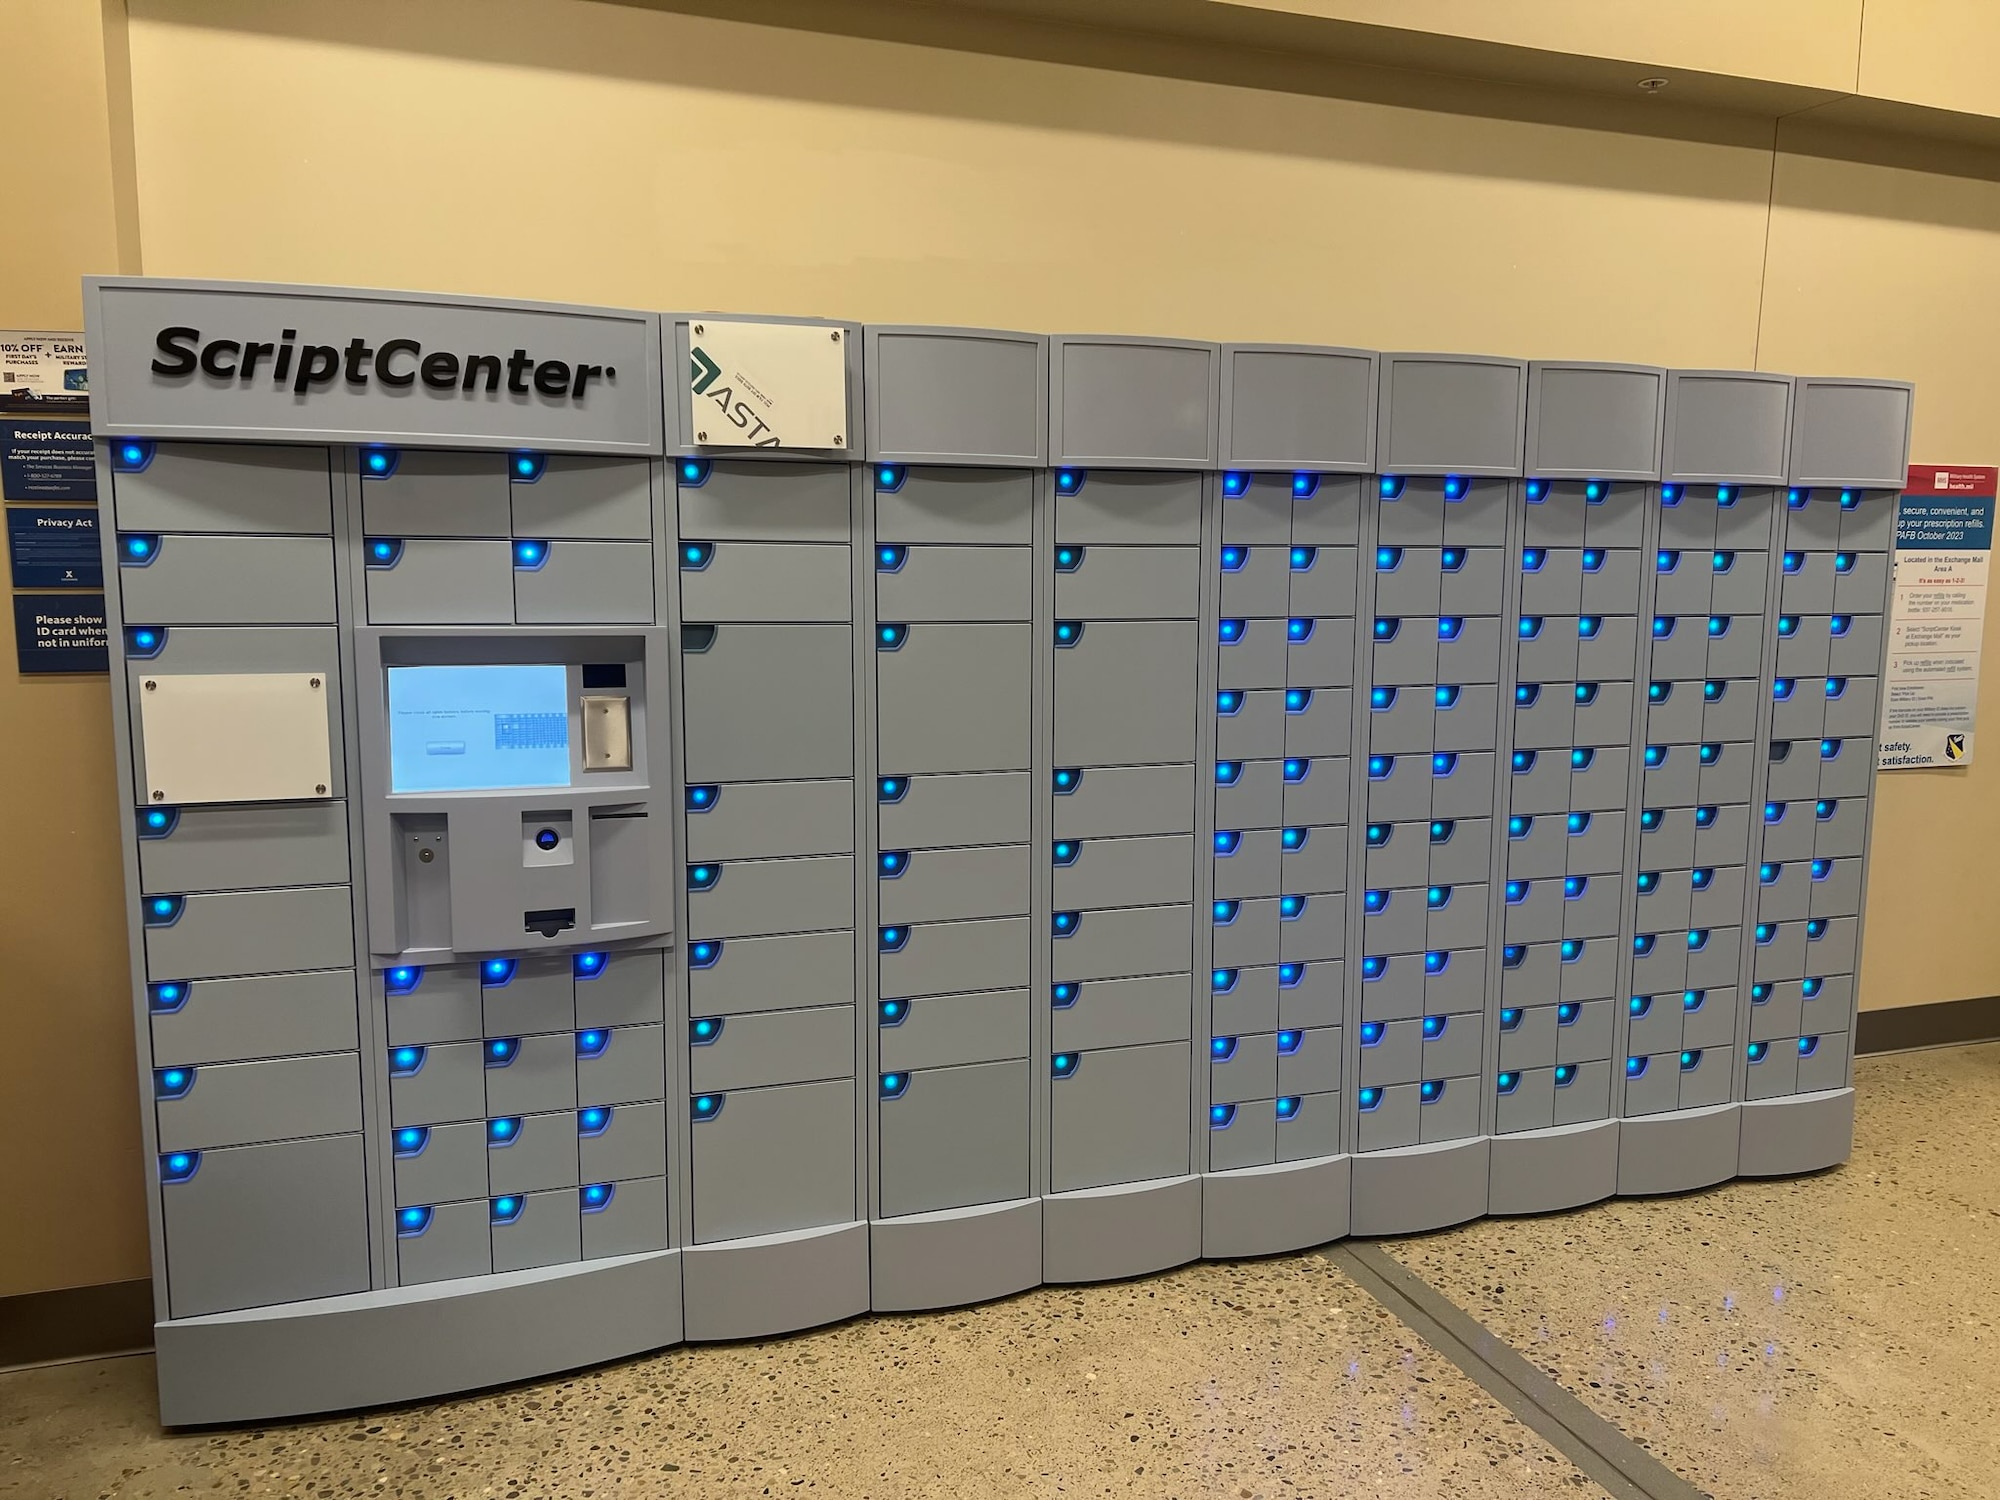 The new ScriptCenter kiosk is located in the main hallway between the commissary and Main Exchange on Wright-Patterson Air Force Base, Ohio. It will be available for use after Oct. 4.